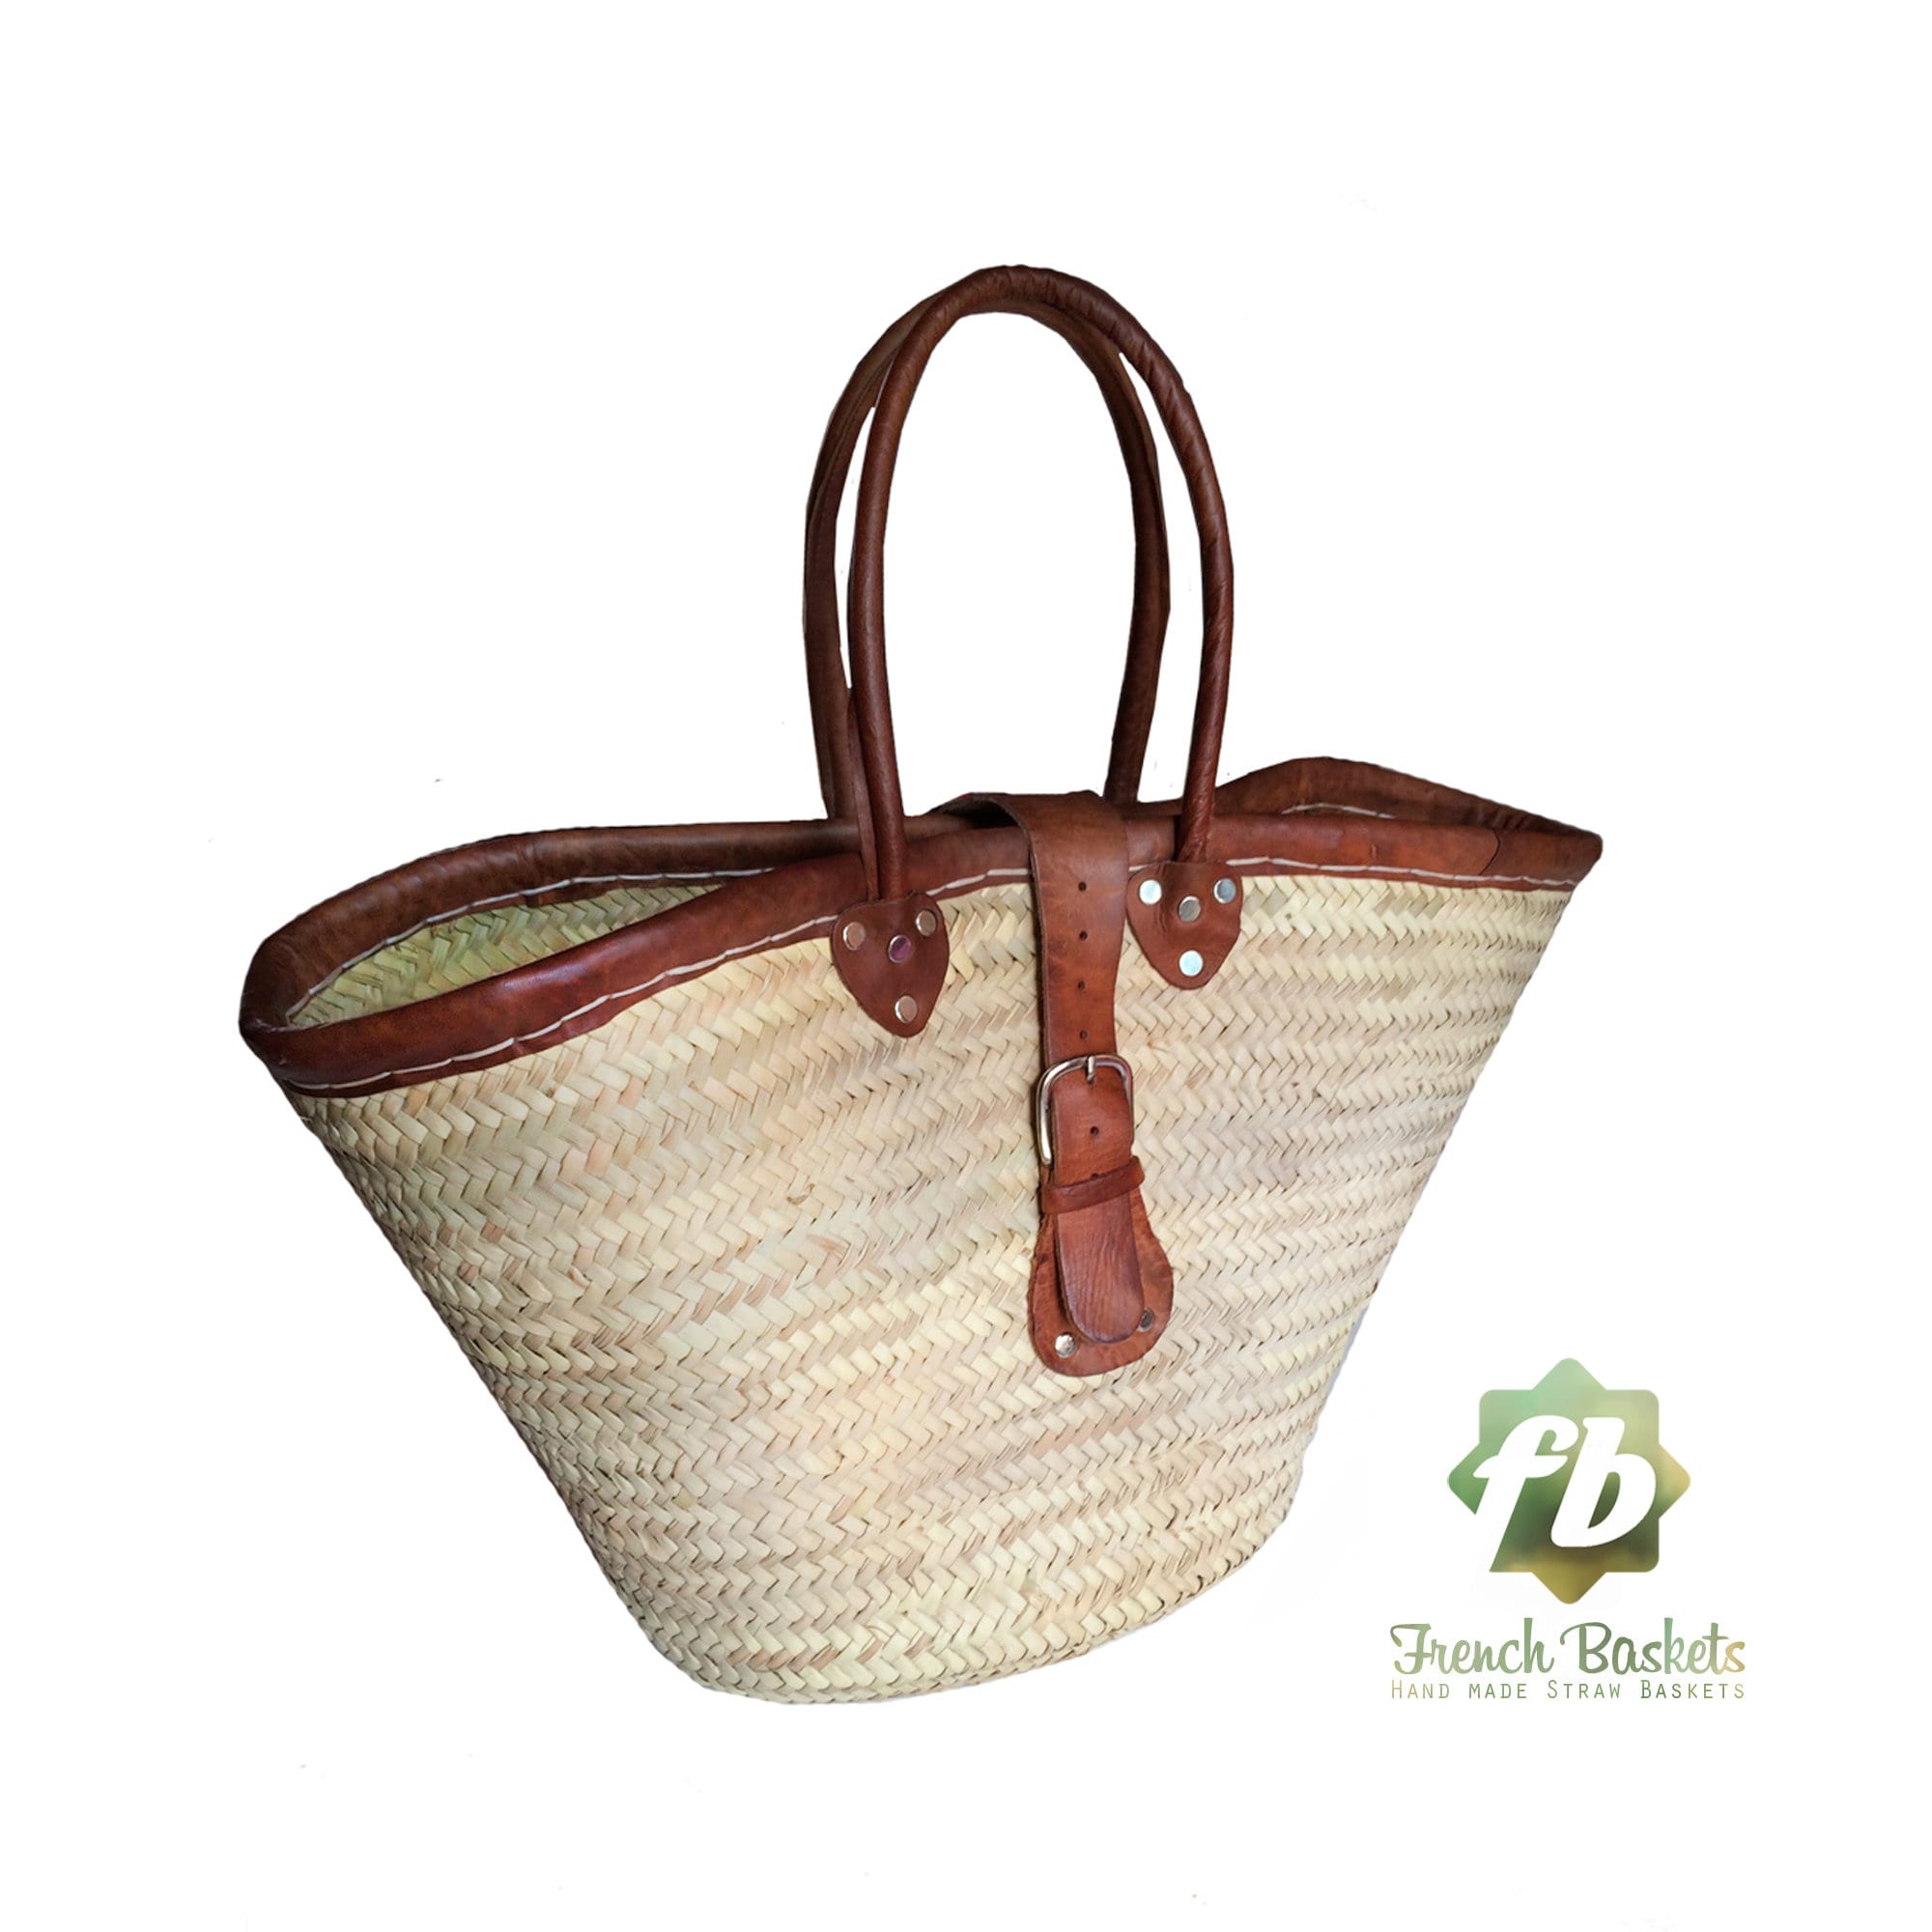 FRENCH BASKET with double flat leather handles, straw bag, beach bag,  basket bag, shopping basket, wicker basket with handle, straw market basket